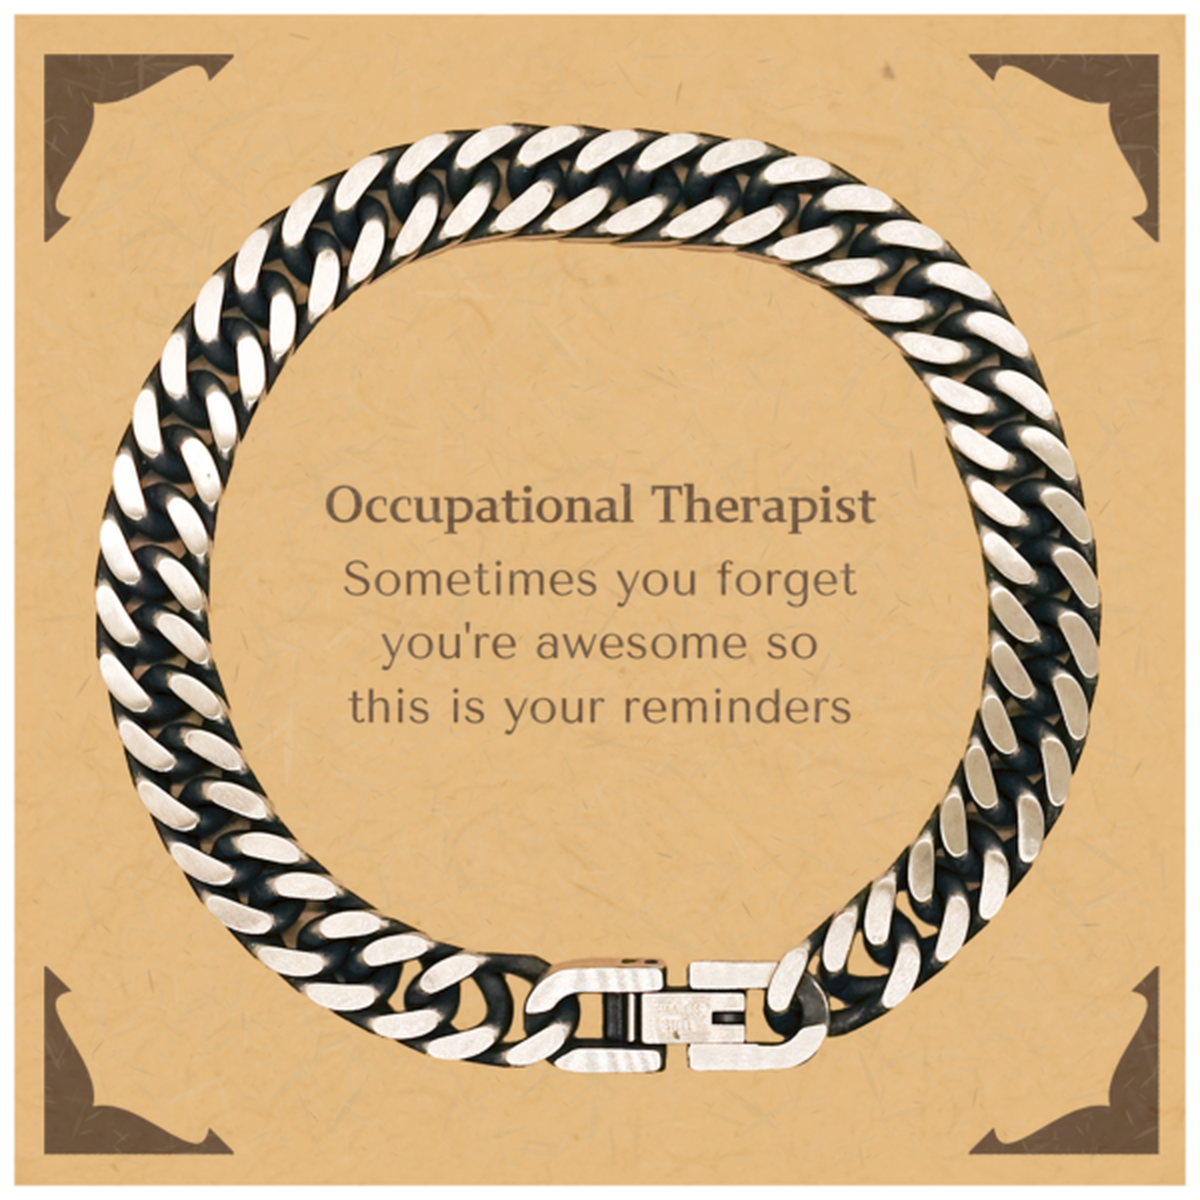 Sentimental Occupational Therapist Cuban Link Chain Bracelet, Occupational Therapist Sometimes you forget you're awesome so this is your reminders, Graduation Christmas Birthday Gifts for Occupational Therapist, Men, Women, Coworkers